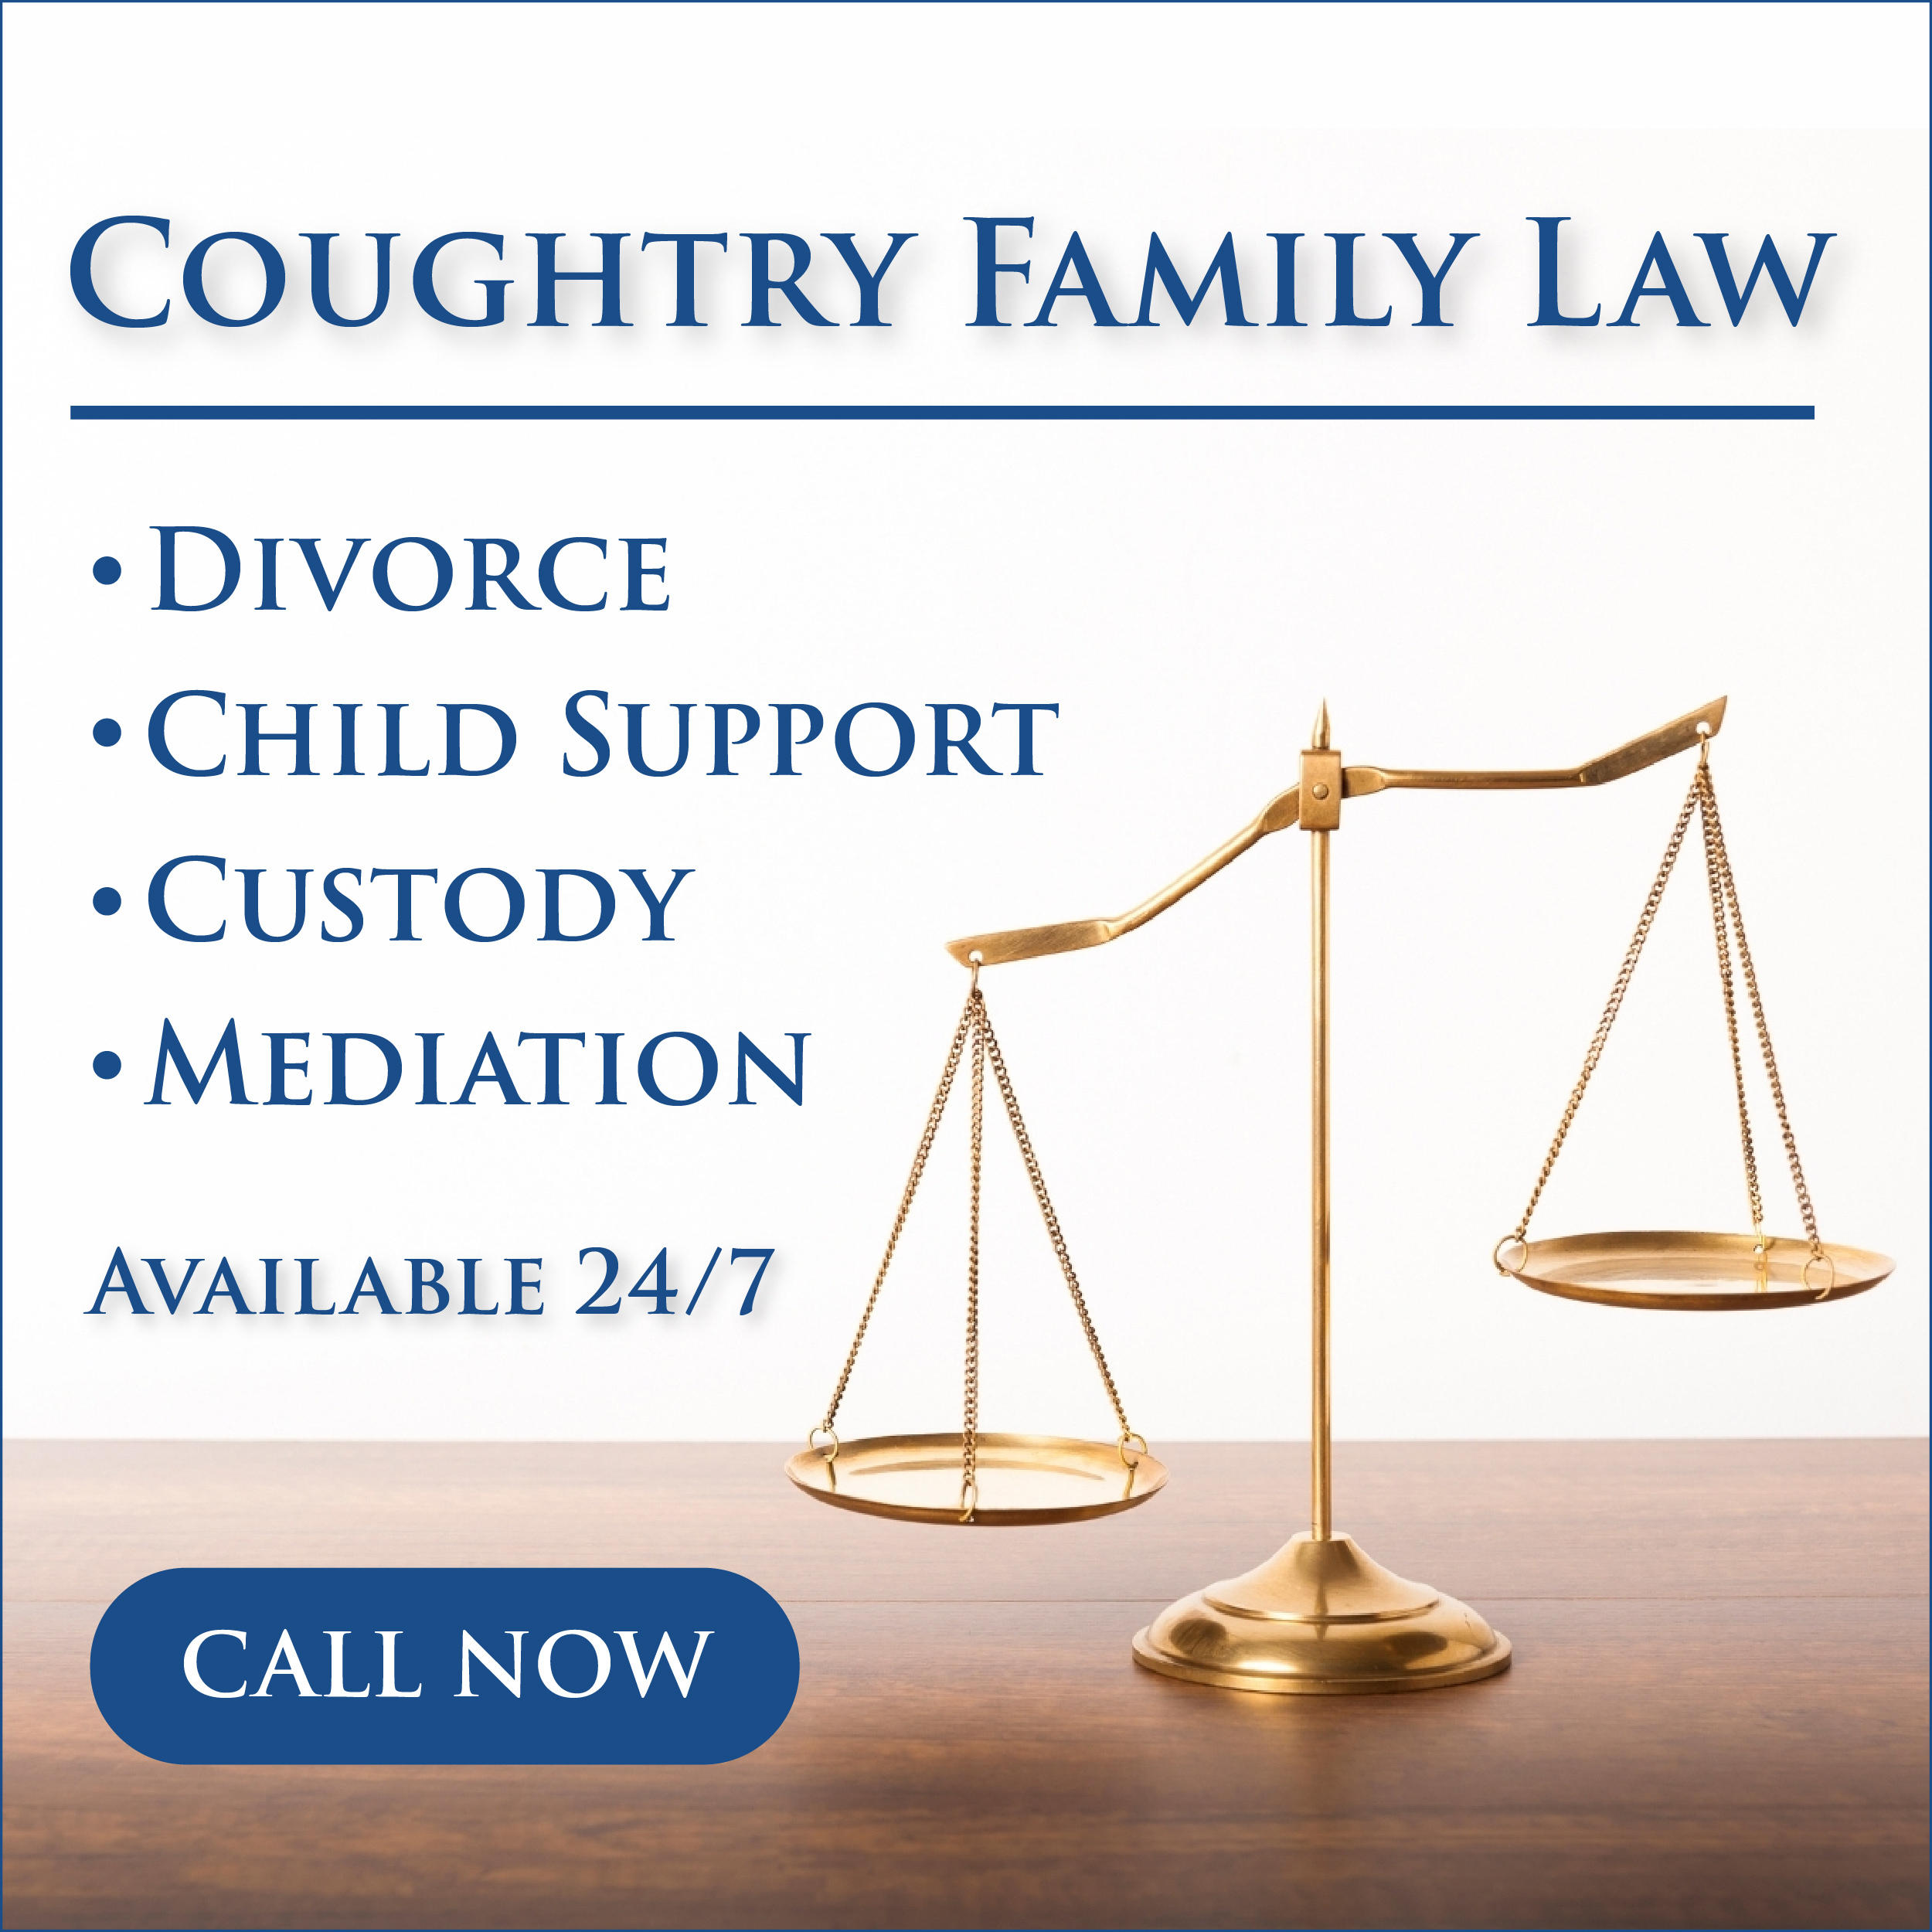 Coughtry Family Law - Top Rated Albany Divorce, Child Support, Custody, Mediation.